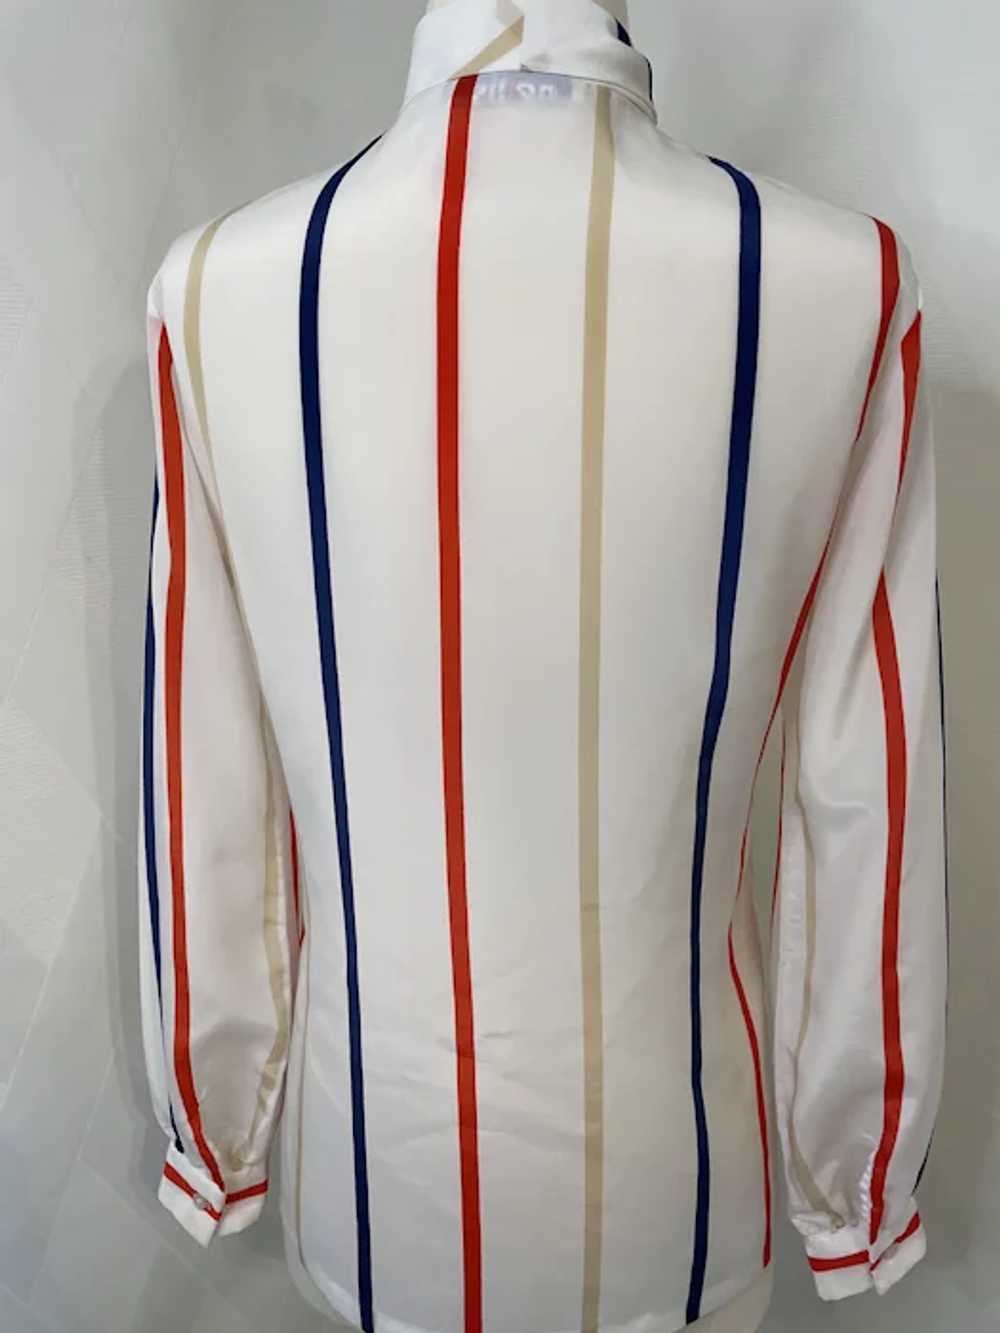 Vintage 1980s News Striped Pussy Bow Blouse - image 5